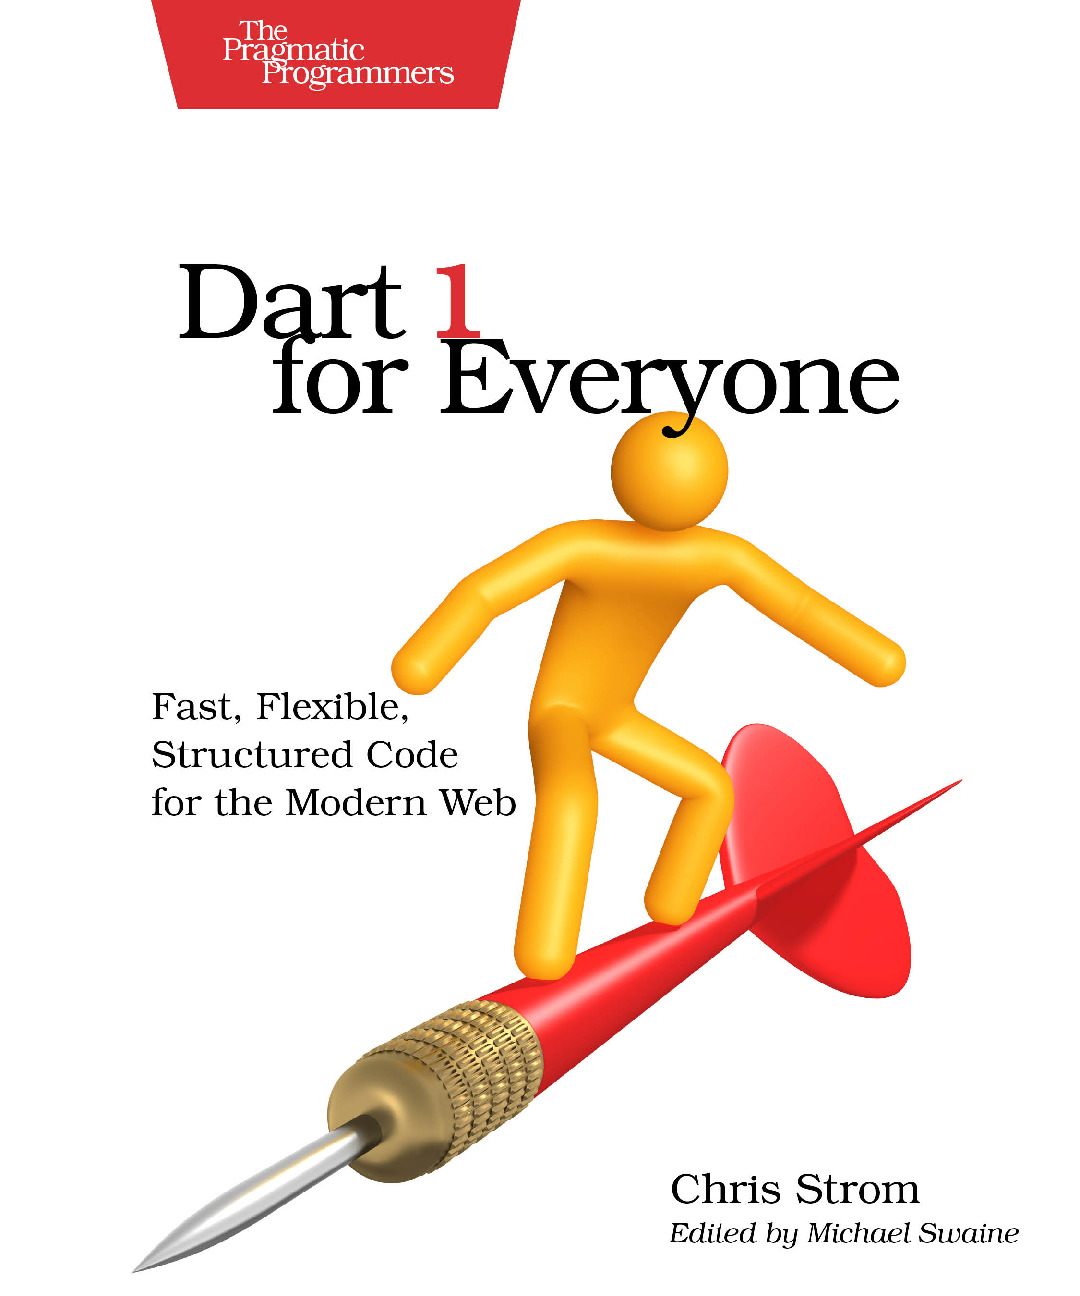 Dart 1 for Everyone Fast, Flexible, Structured Code for the Modern Web